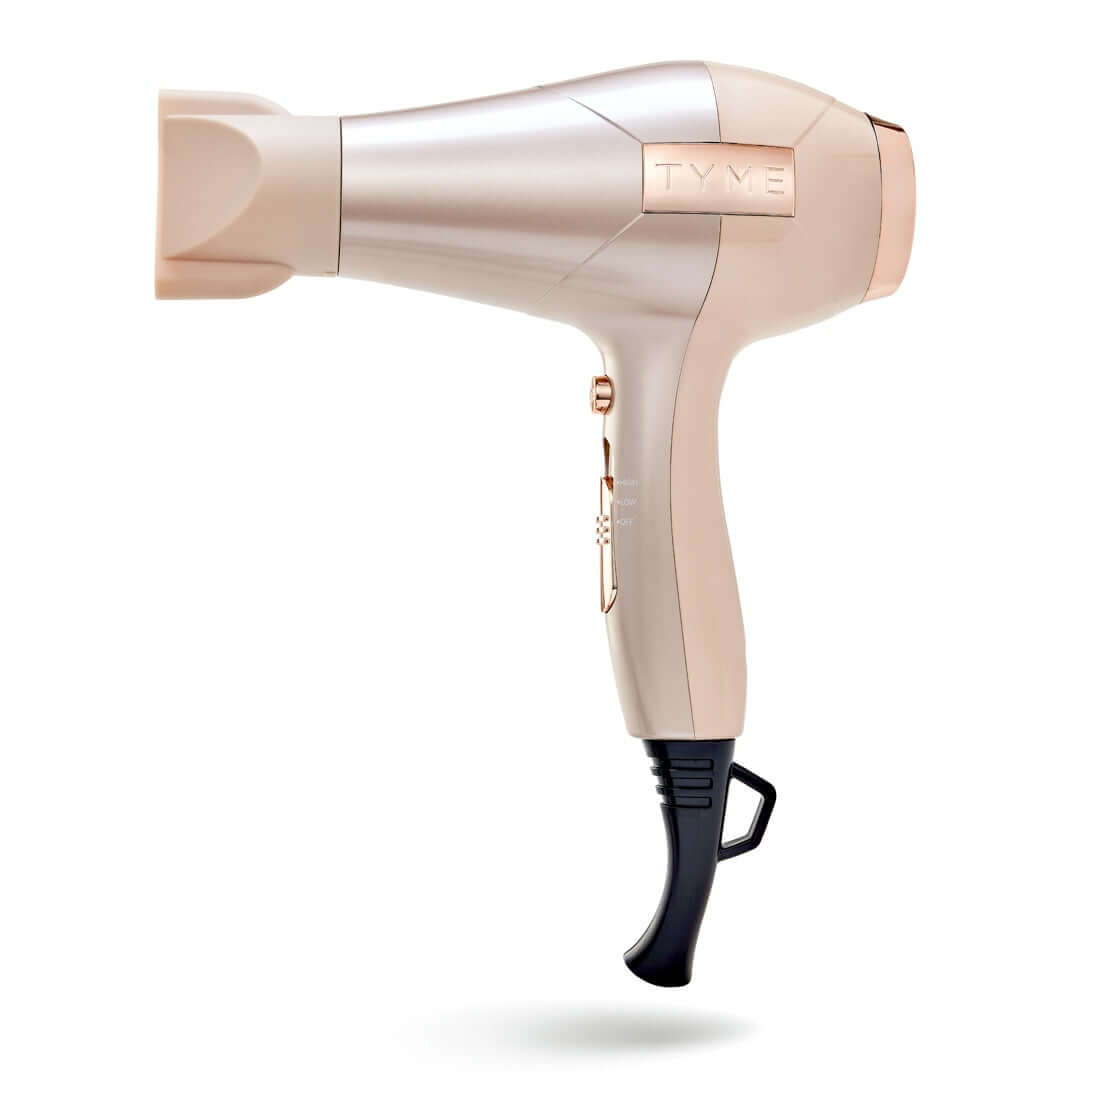 Side of rose gold and pale taupe TYME BlowTYME Hair Dryer with included concentrator attached and handle loop at the base.